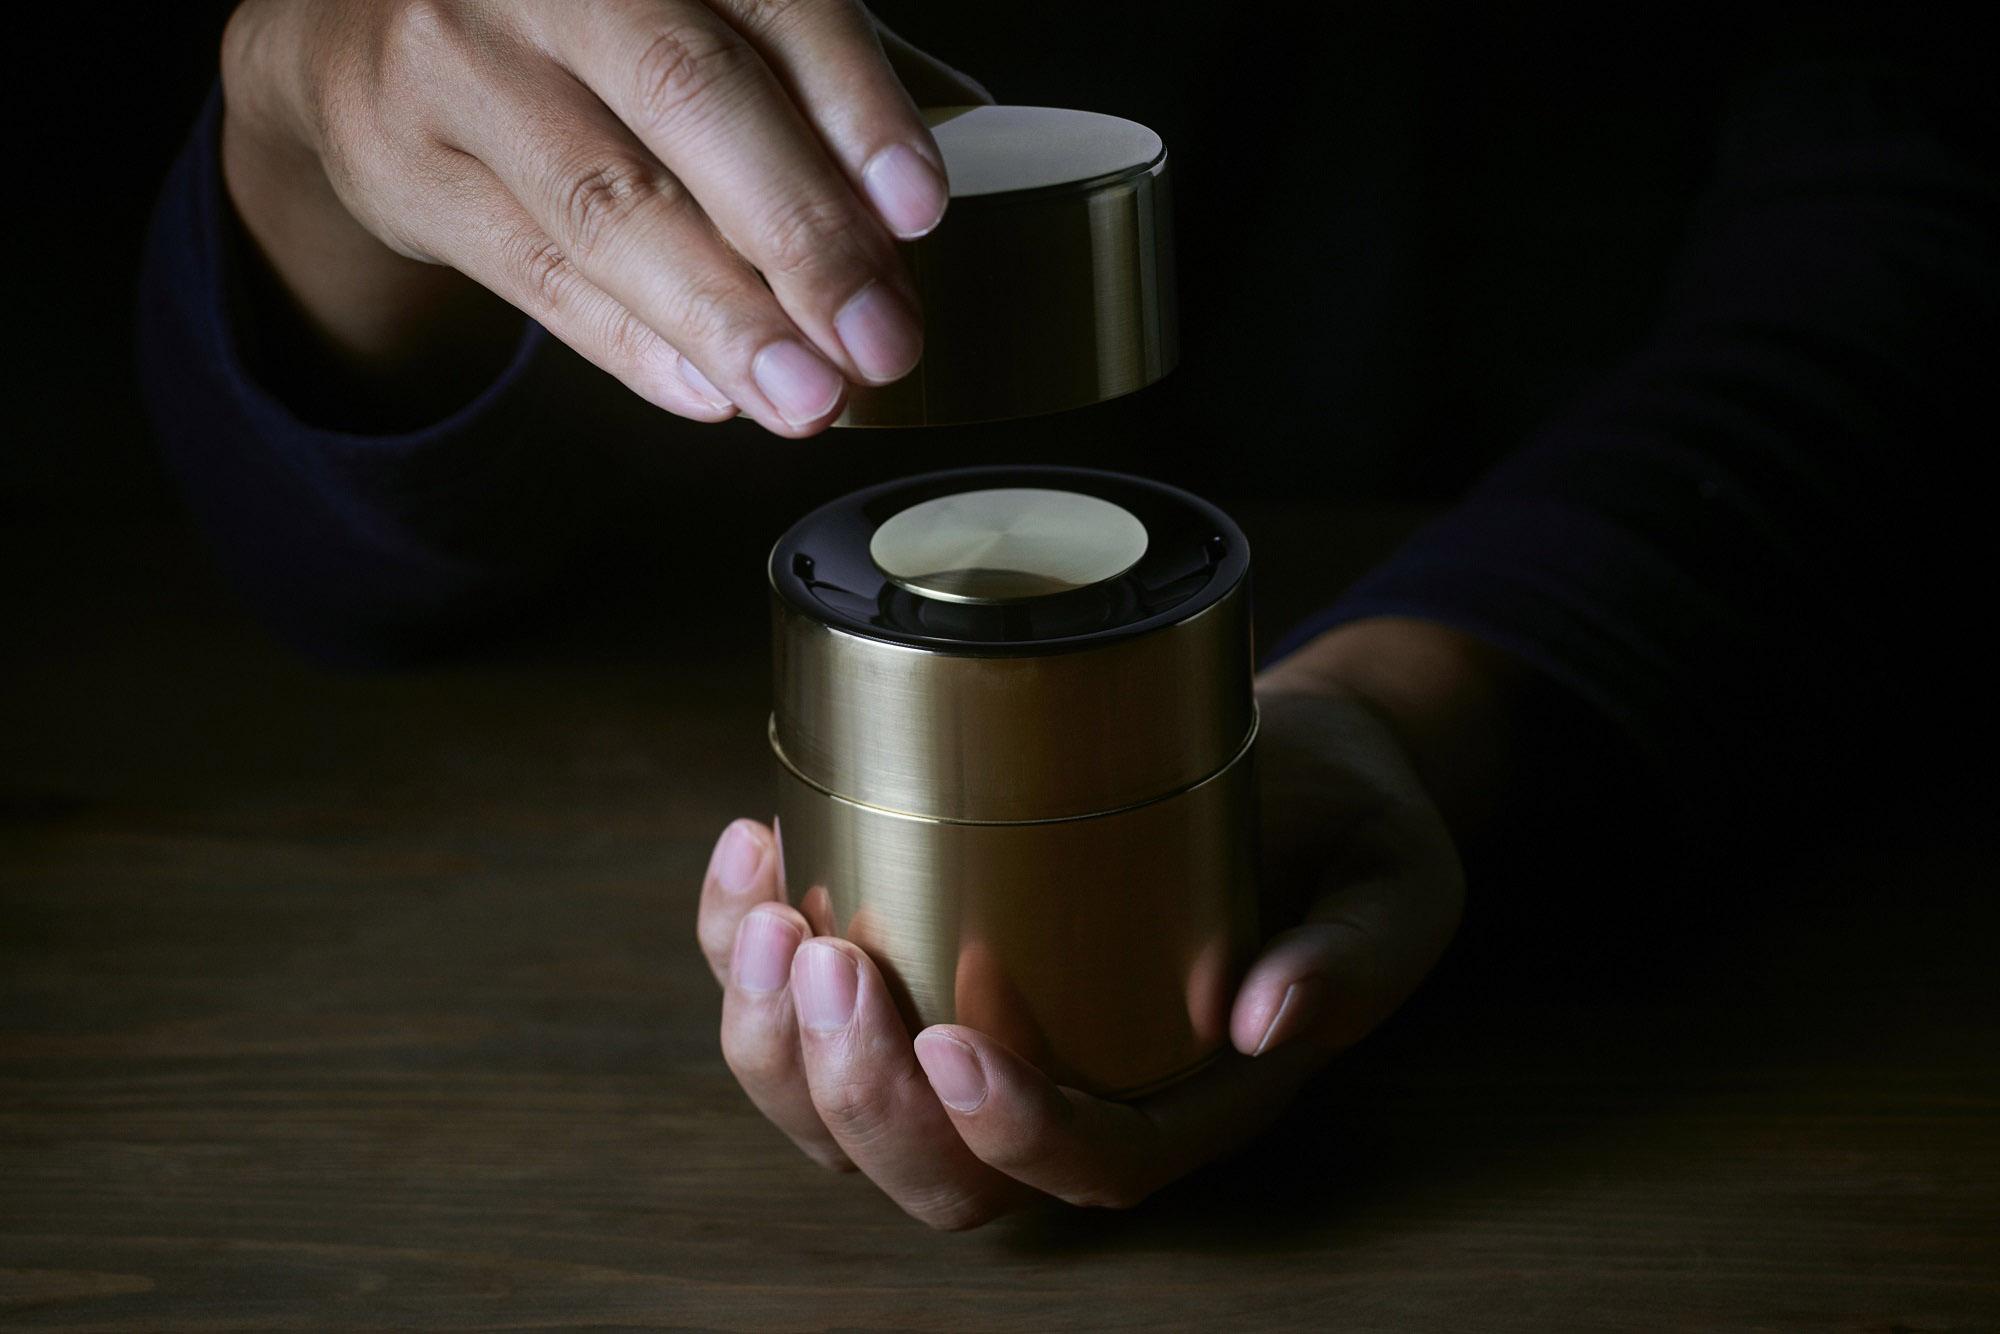 photo: kyo-zutsu Developed by Panasonic in Collaboration with Kyoto's Traditional Crafts